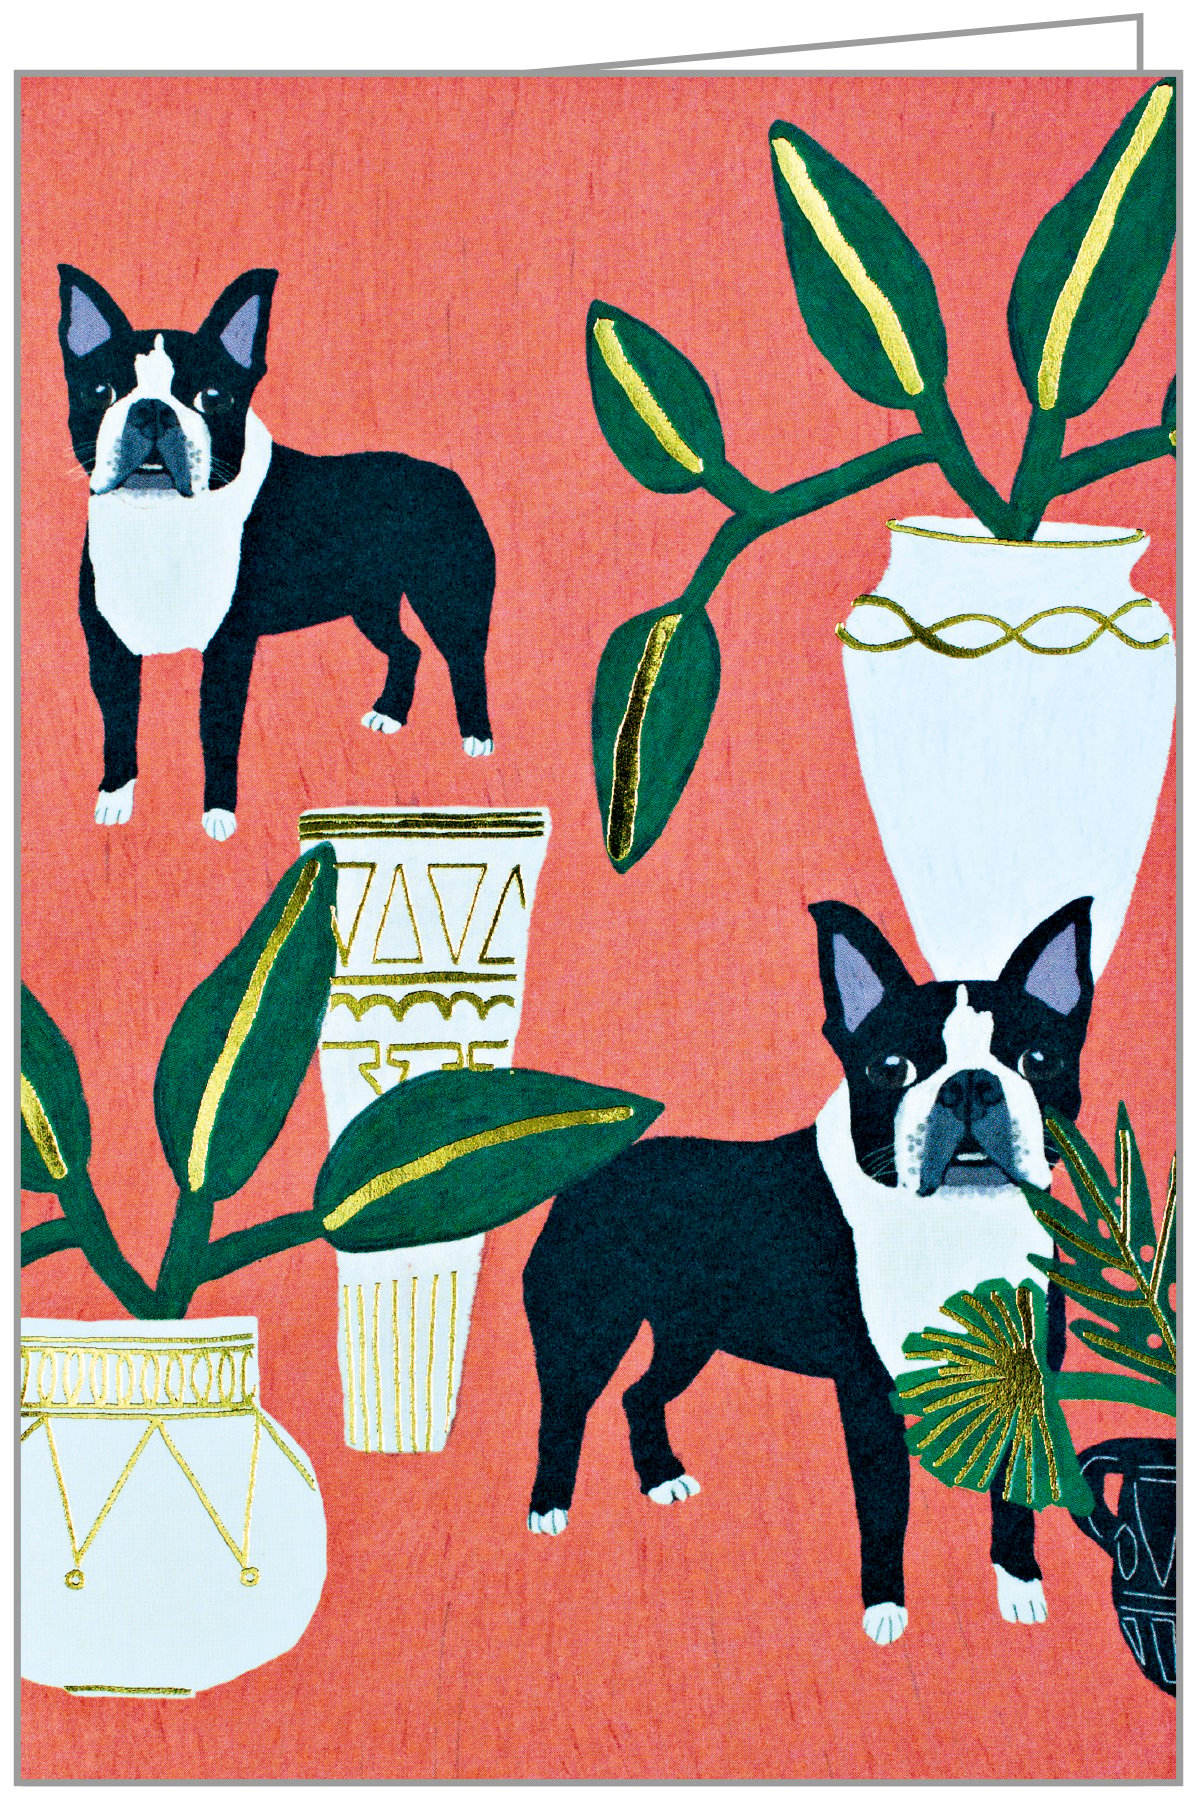 Anne Bentley’s Boston Terriers and green foliage in vases design, to notecard, by teNeues Stationery.